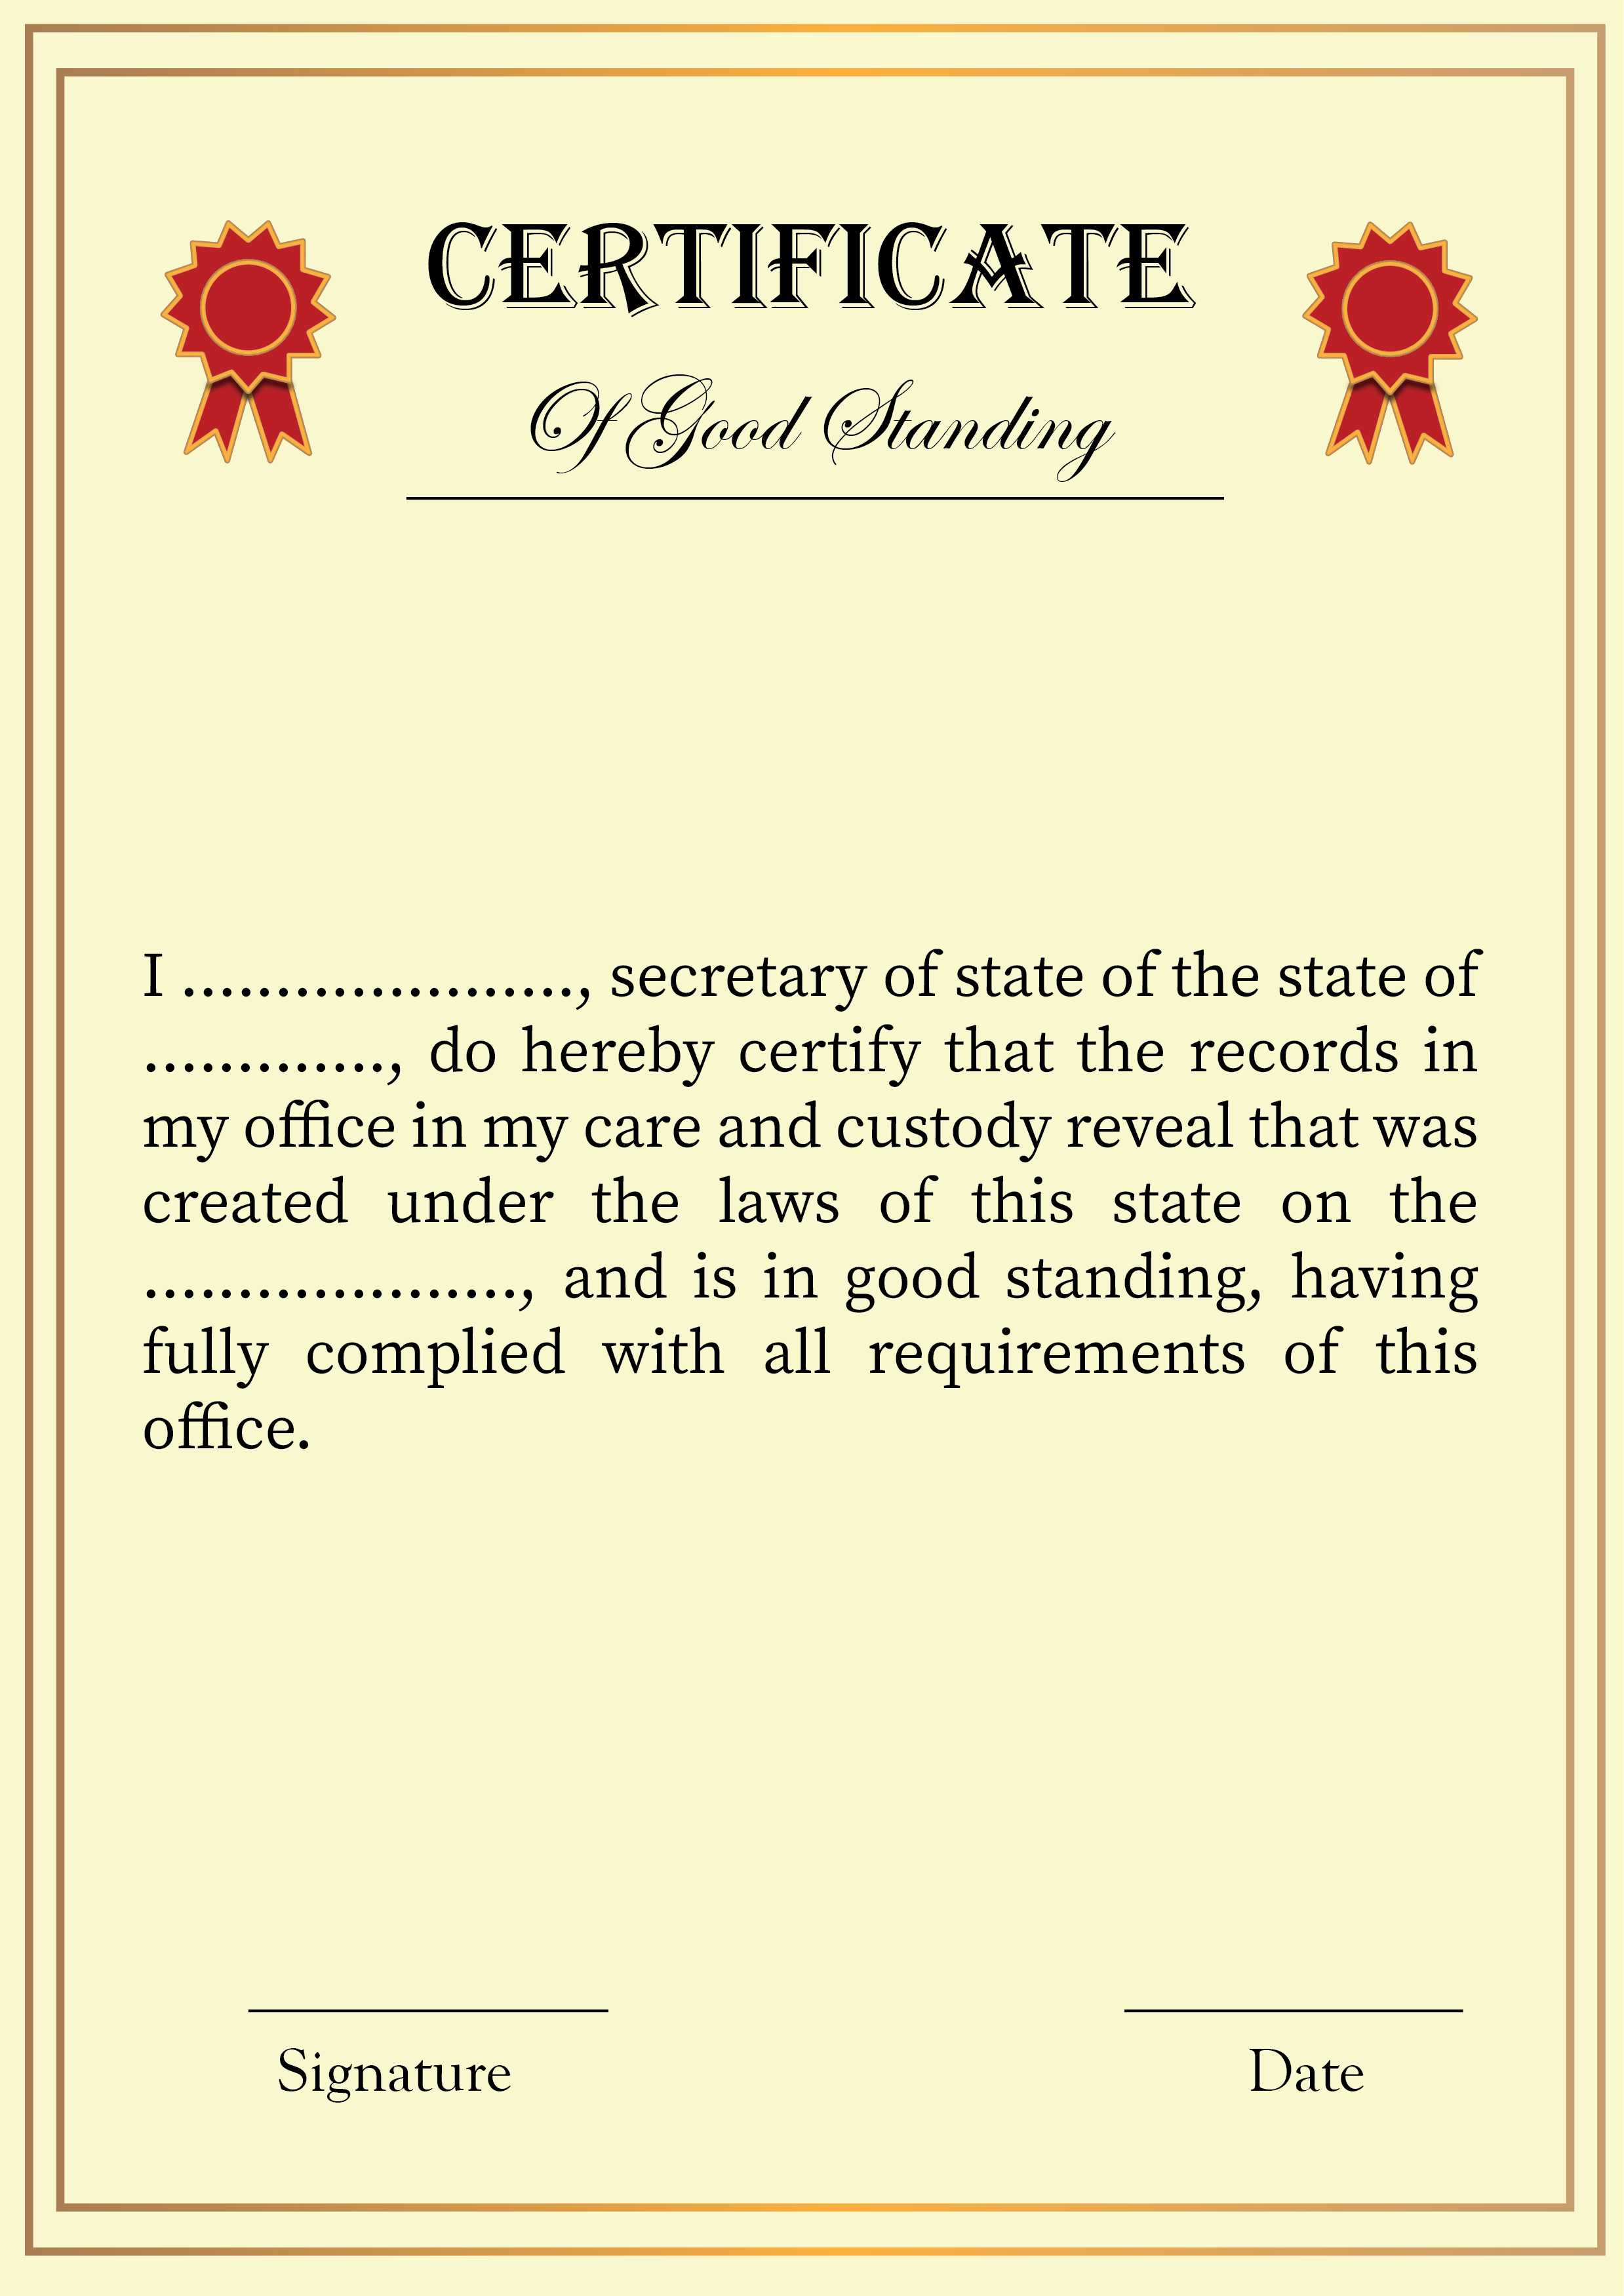 Certificate Of Good Standing Template 